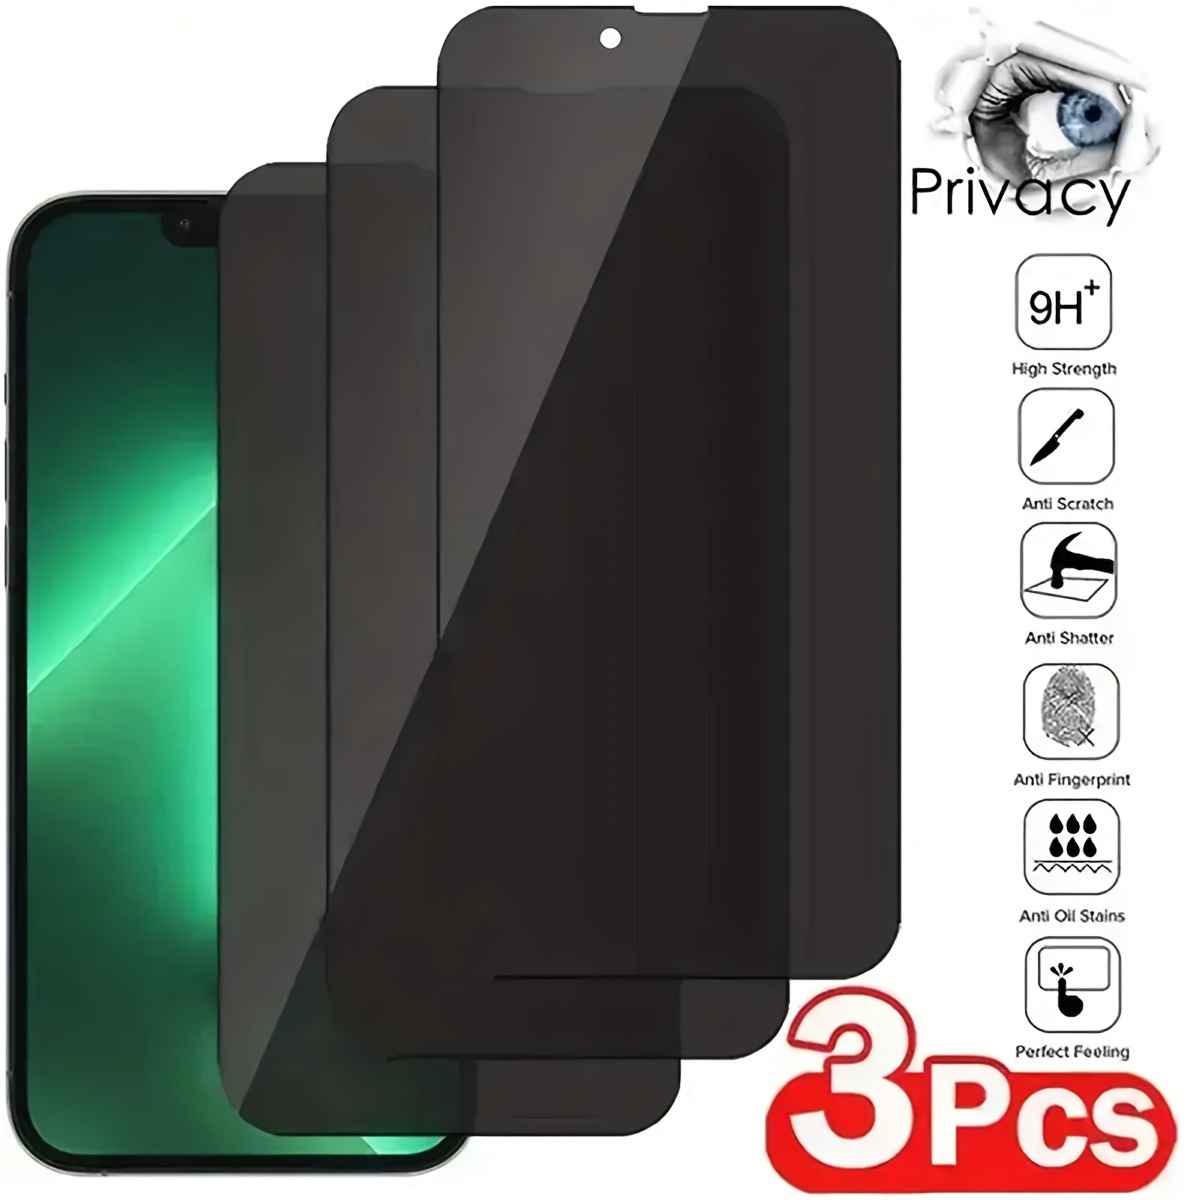 

3-piece Privacy Screen Protector For Iphone 14/15 Series, Xr, 11, 12, 13 Pro Max - Full Coverage Tempered Glass Film Guard Your Iphone Screen In Style